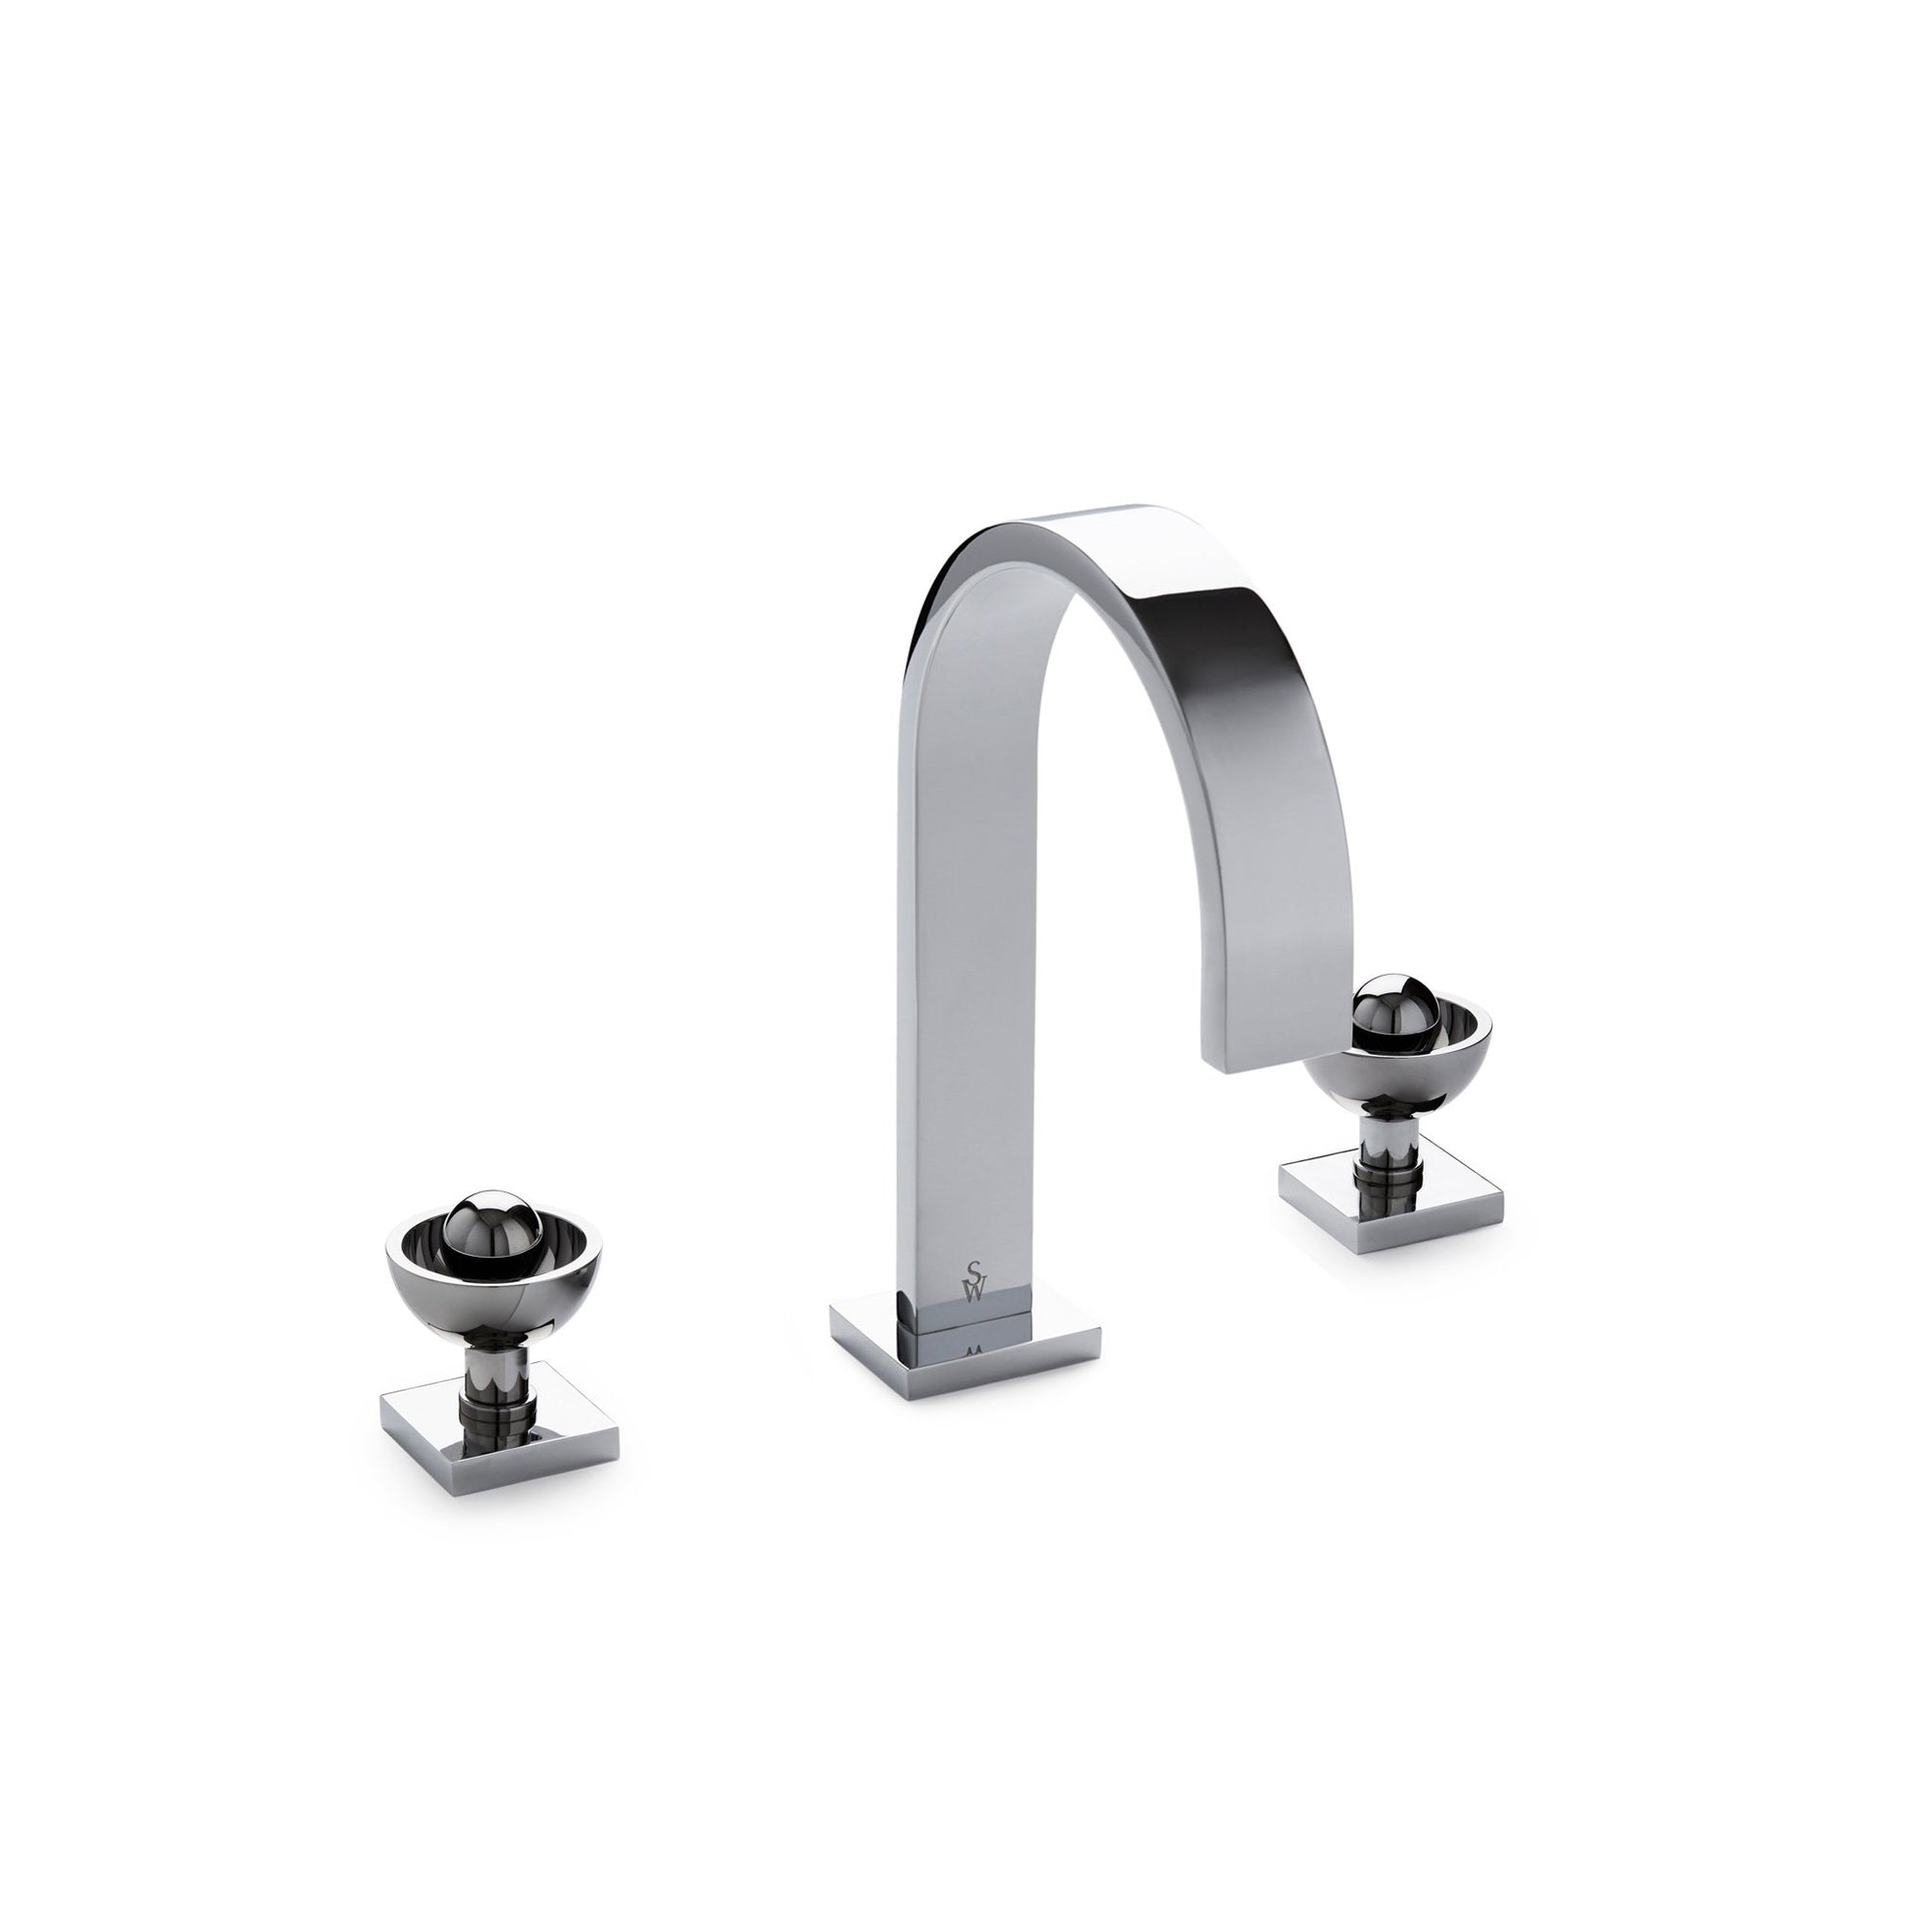 2006BSN101-CP Sherle Wagner International Arbor with Saturn Knob Faucet Set in Polished Chrome metal finish